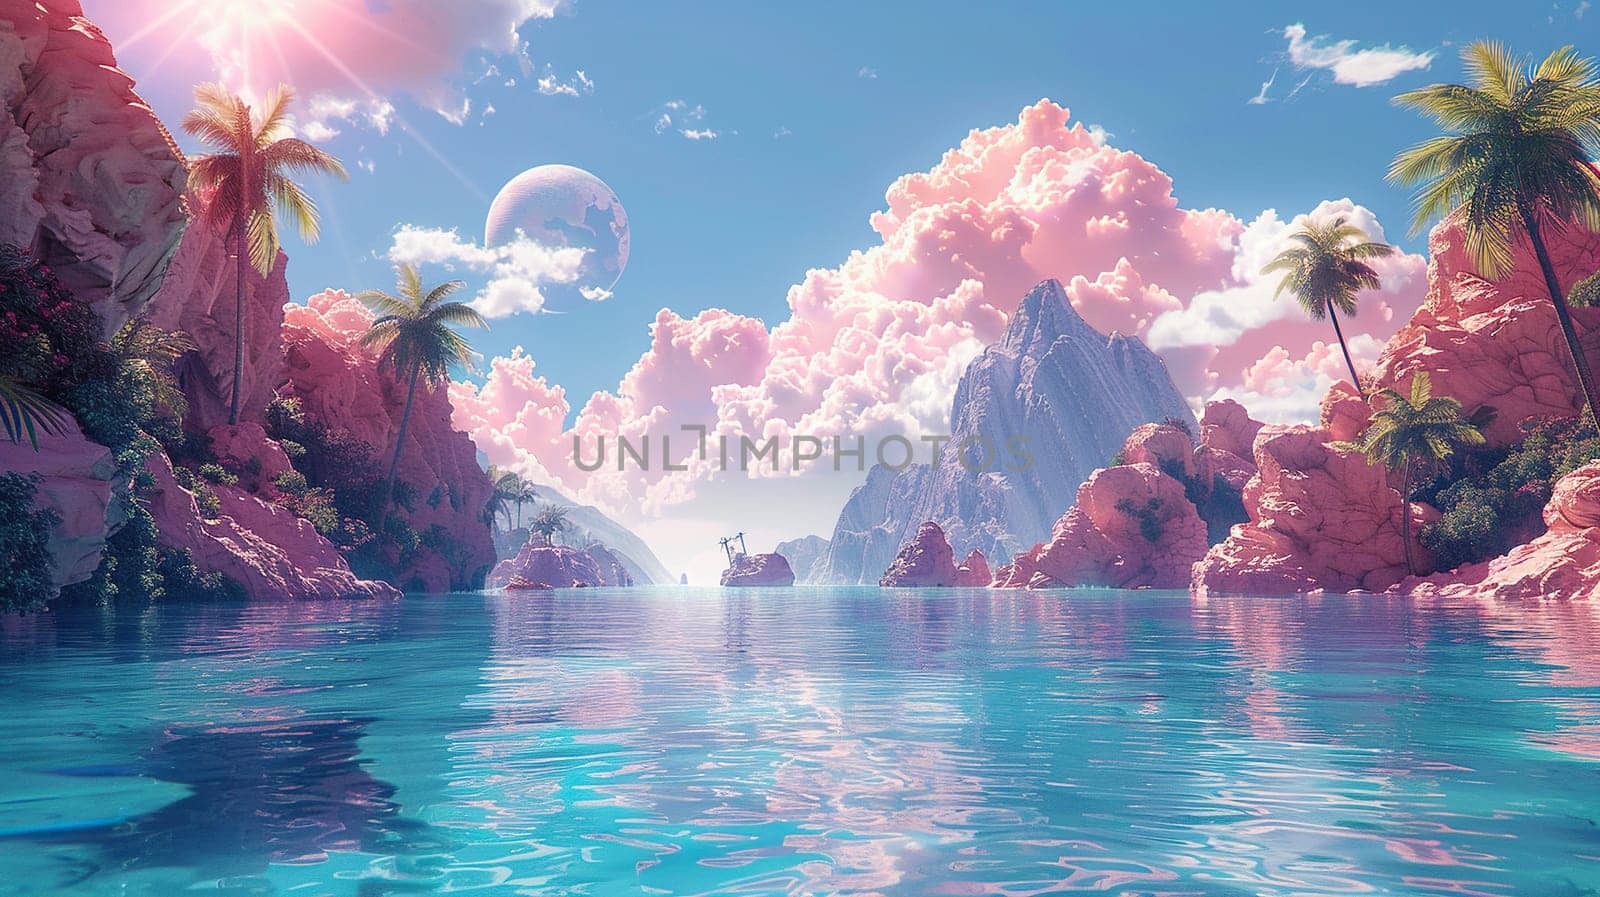 Abstract futuristic fantasy seascape with blue water, pink rocks and palm trees. Big moon in the blue sky.